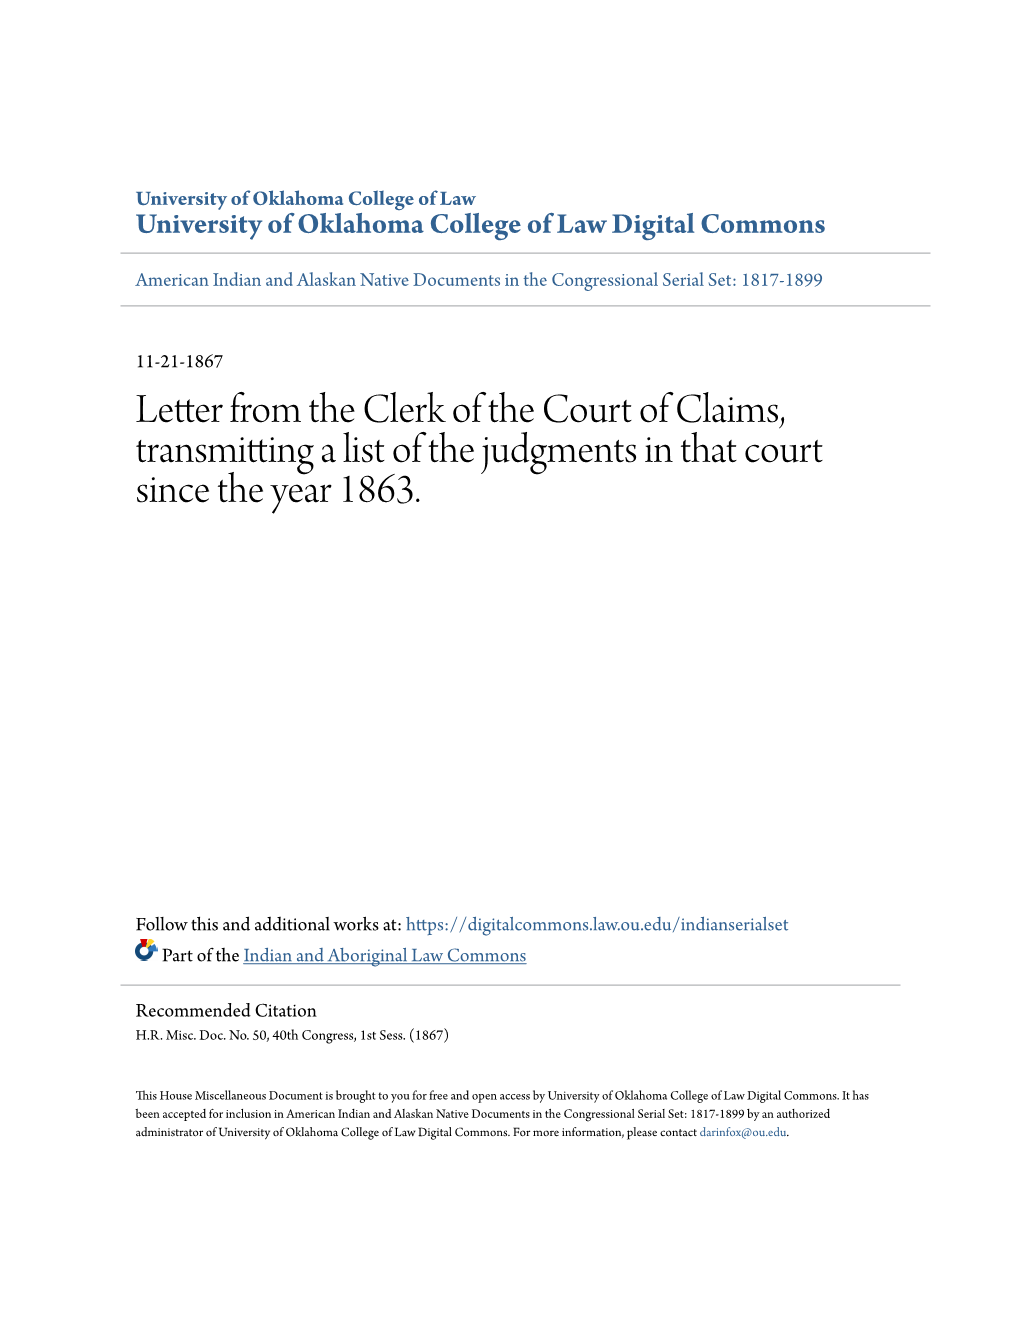 Letter from the Clerk of the Court of Claims, Transmitting a List of the Judgments in That Court Since the Year 1863